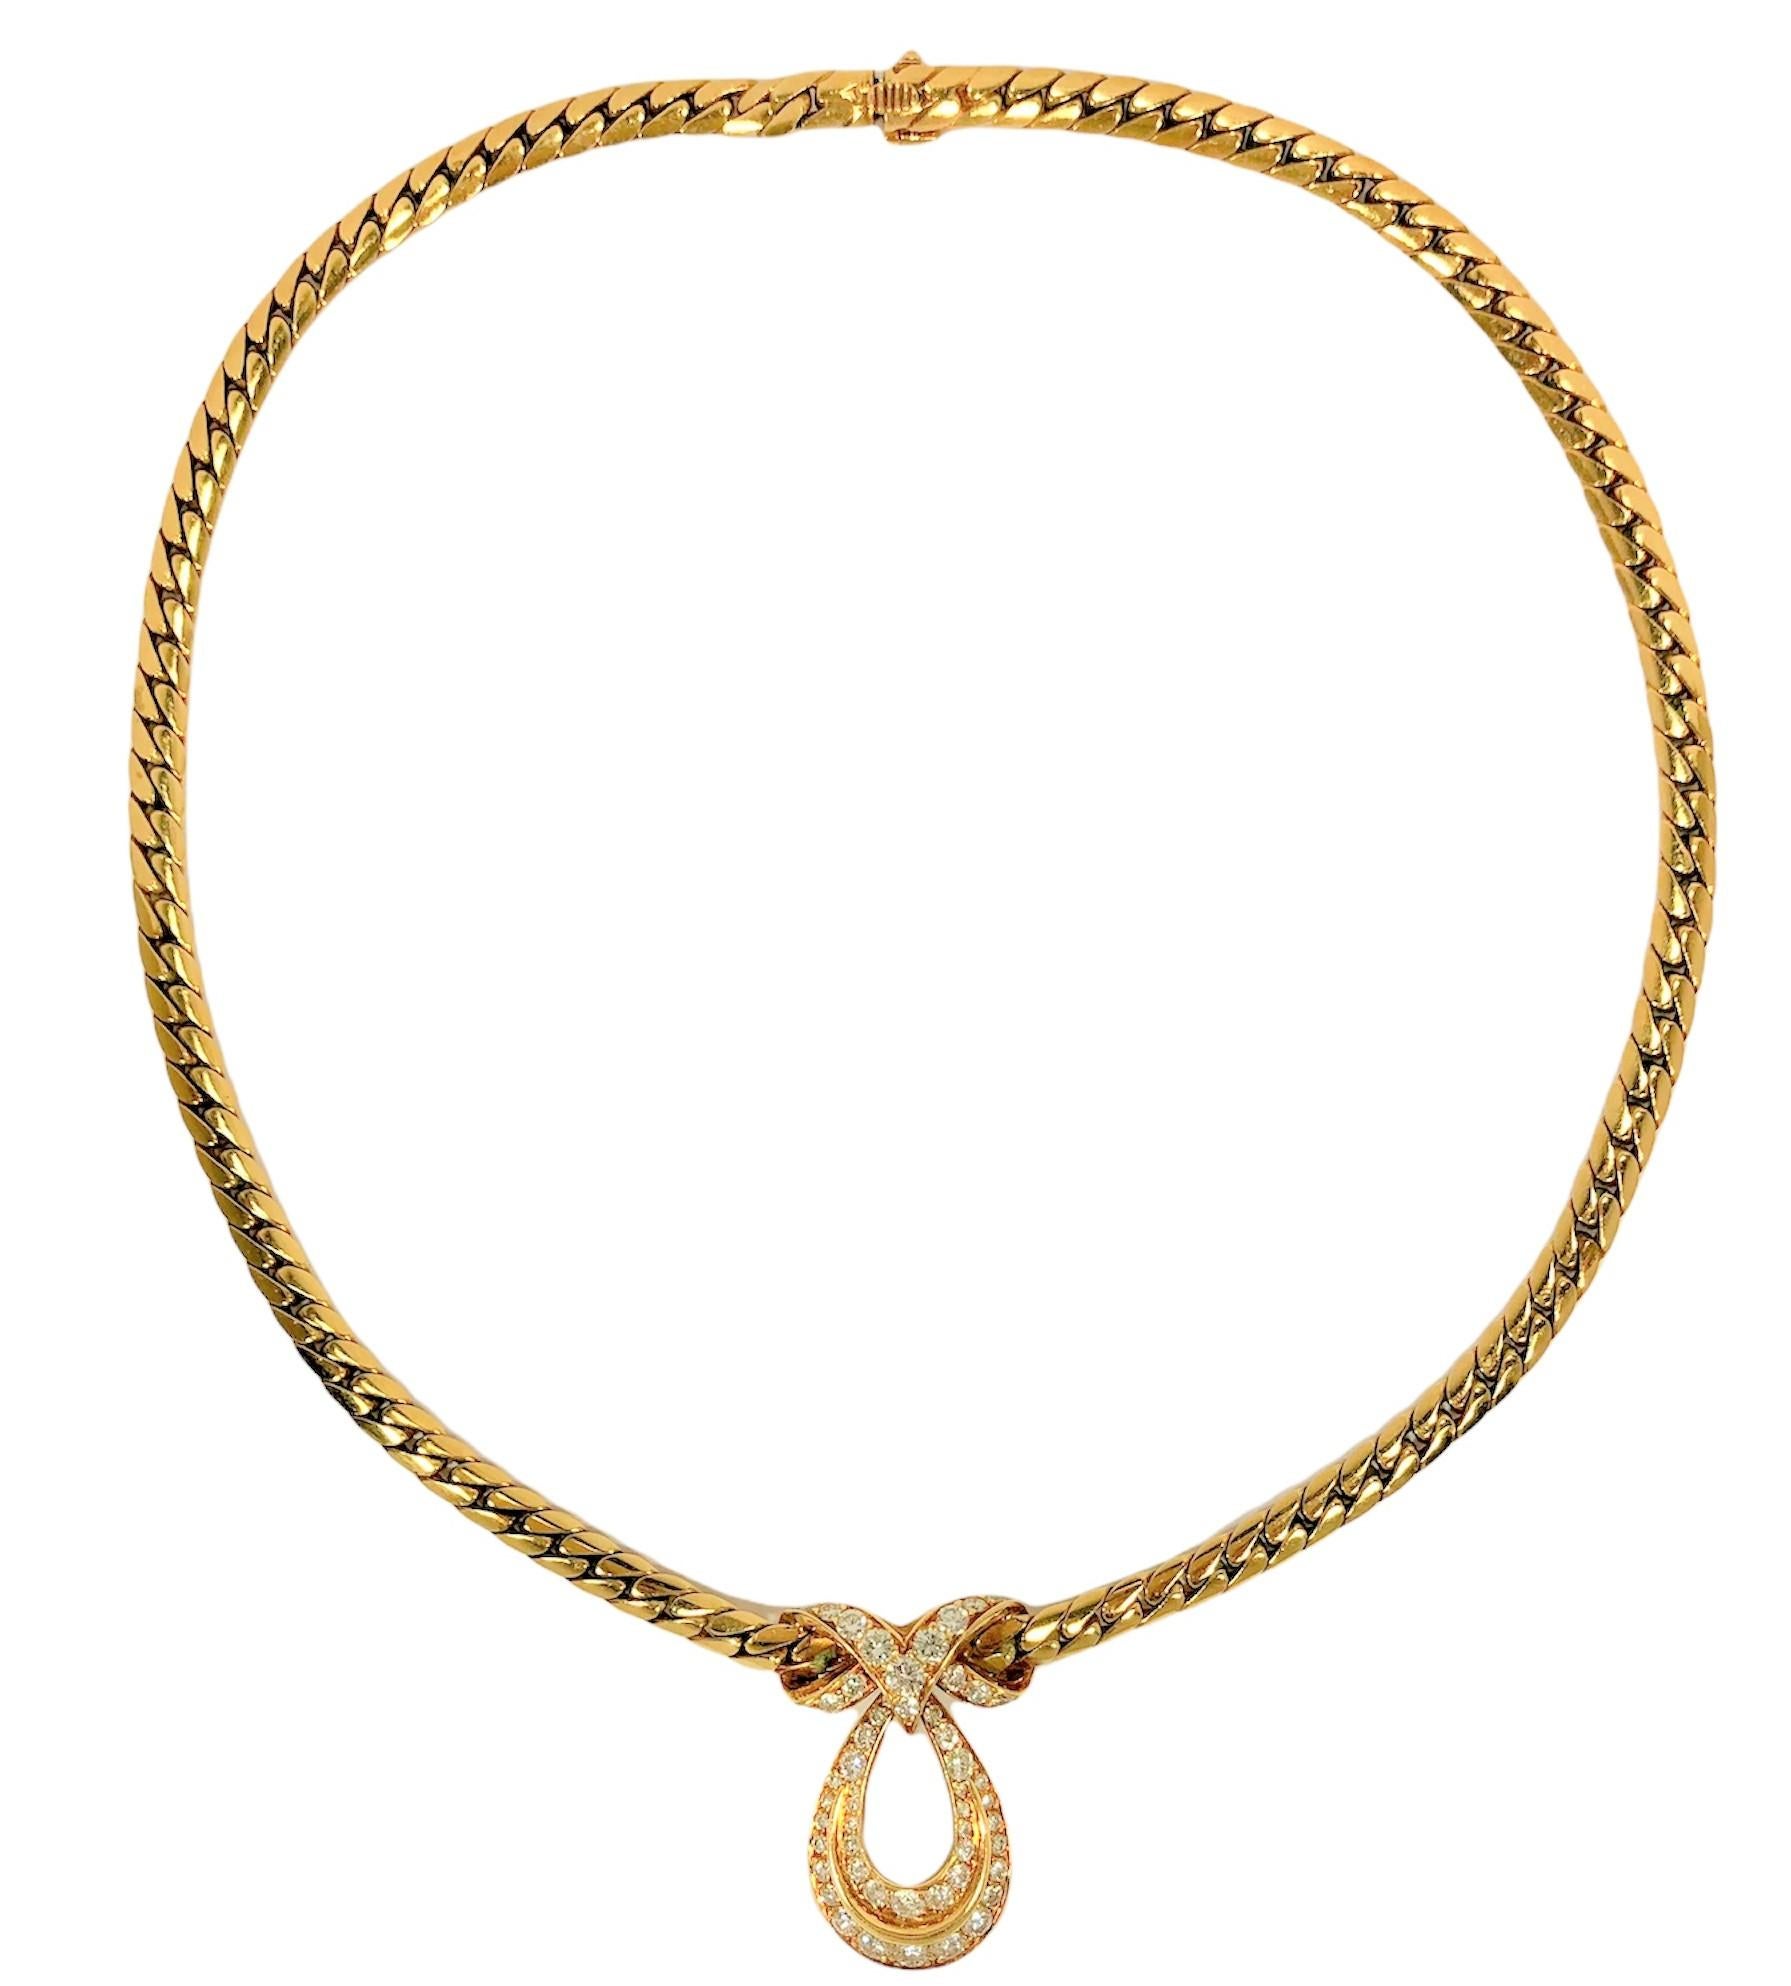 Brilliant Cut French Cartier Gold and Diamond Necklace